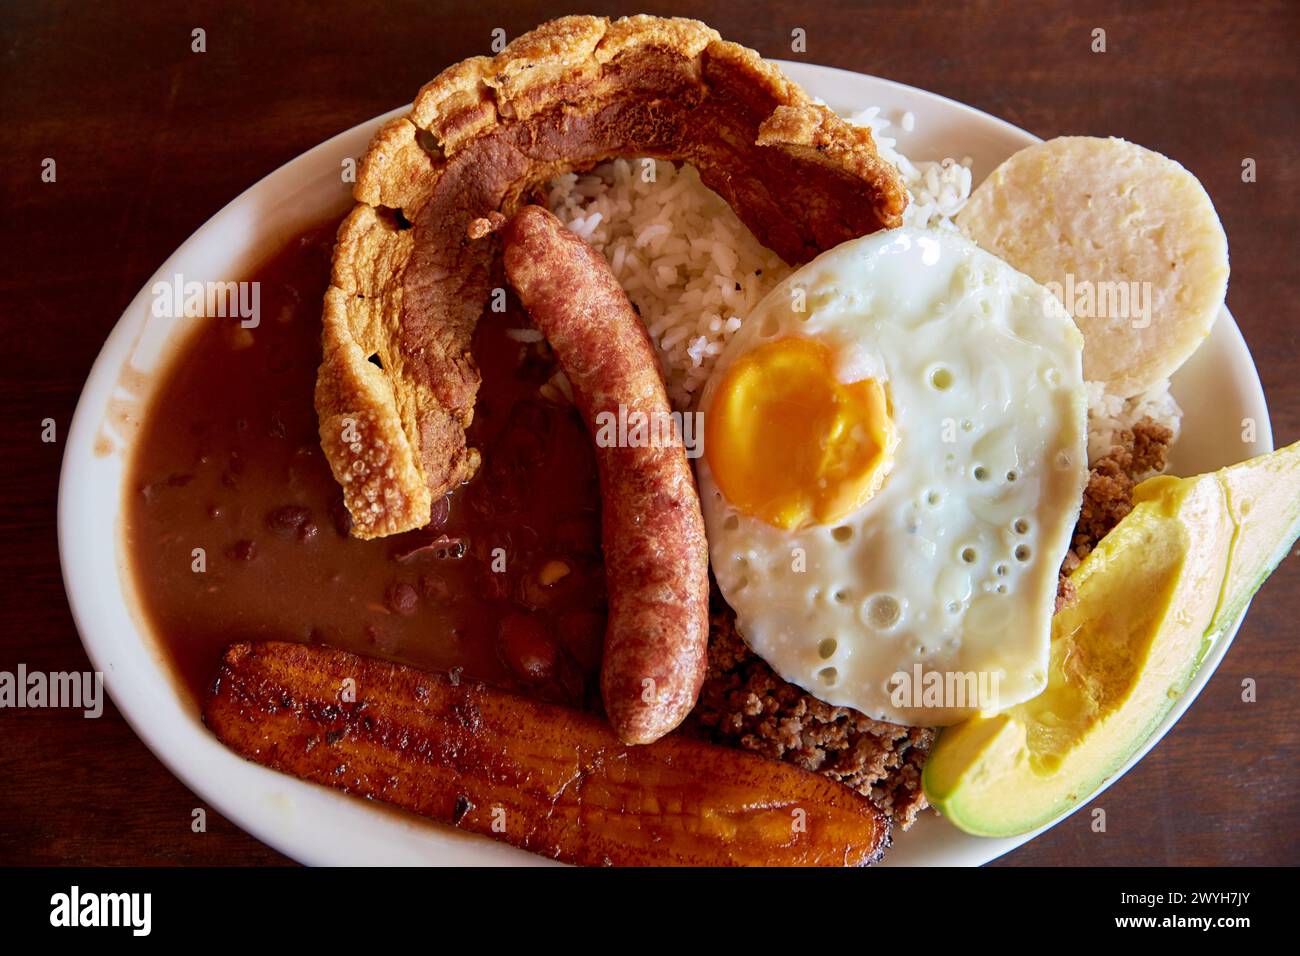 Bandeja paisa, Paisa tray (Ingredients: beans, rice, ground beef, sausage, pork, fried plantains, avocado, corn cake), It is typical of the Antiochian kitchen, most representative dish of the region, Antioquia, Colombia, South America. Stock Photo